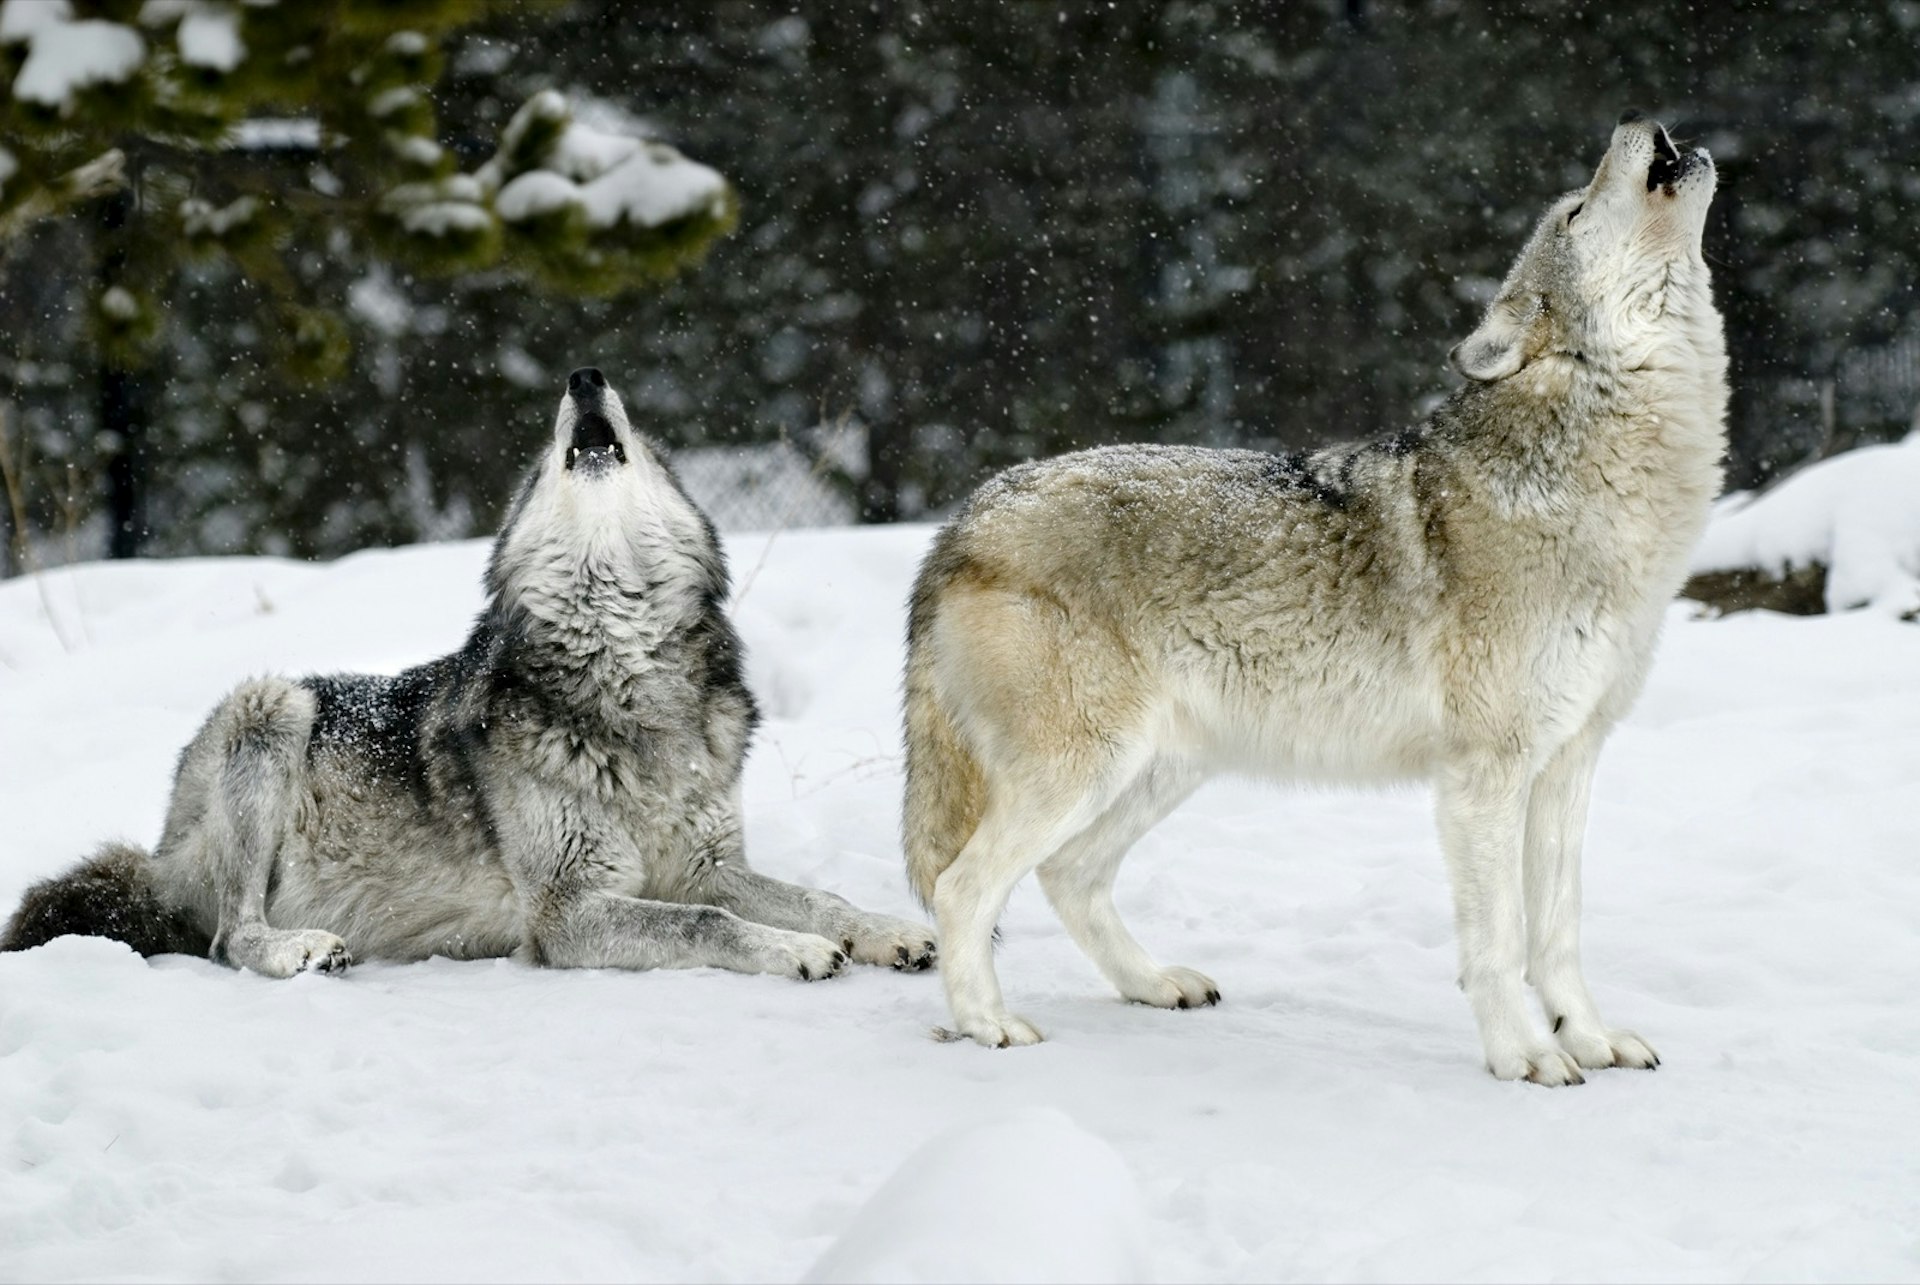 A pair of wolves, both howling with mouths open and snow falling around; Yellowstone winter wildlife